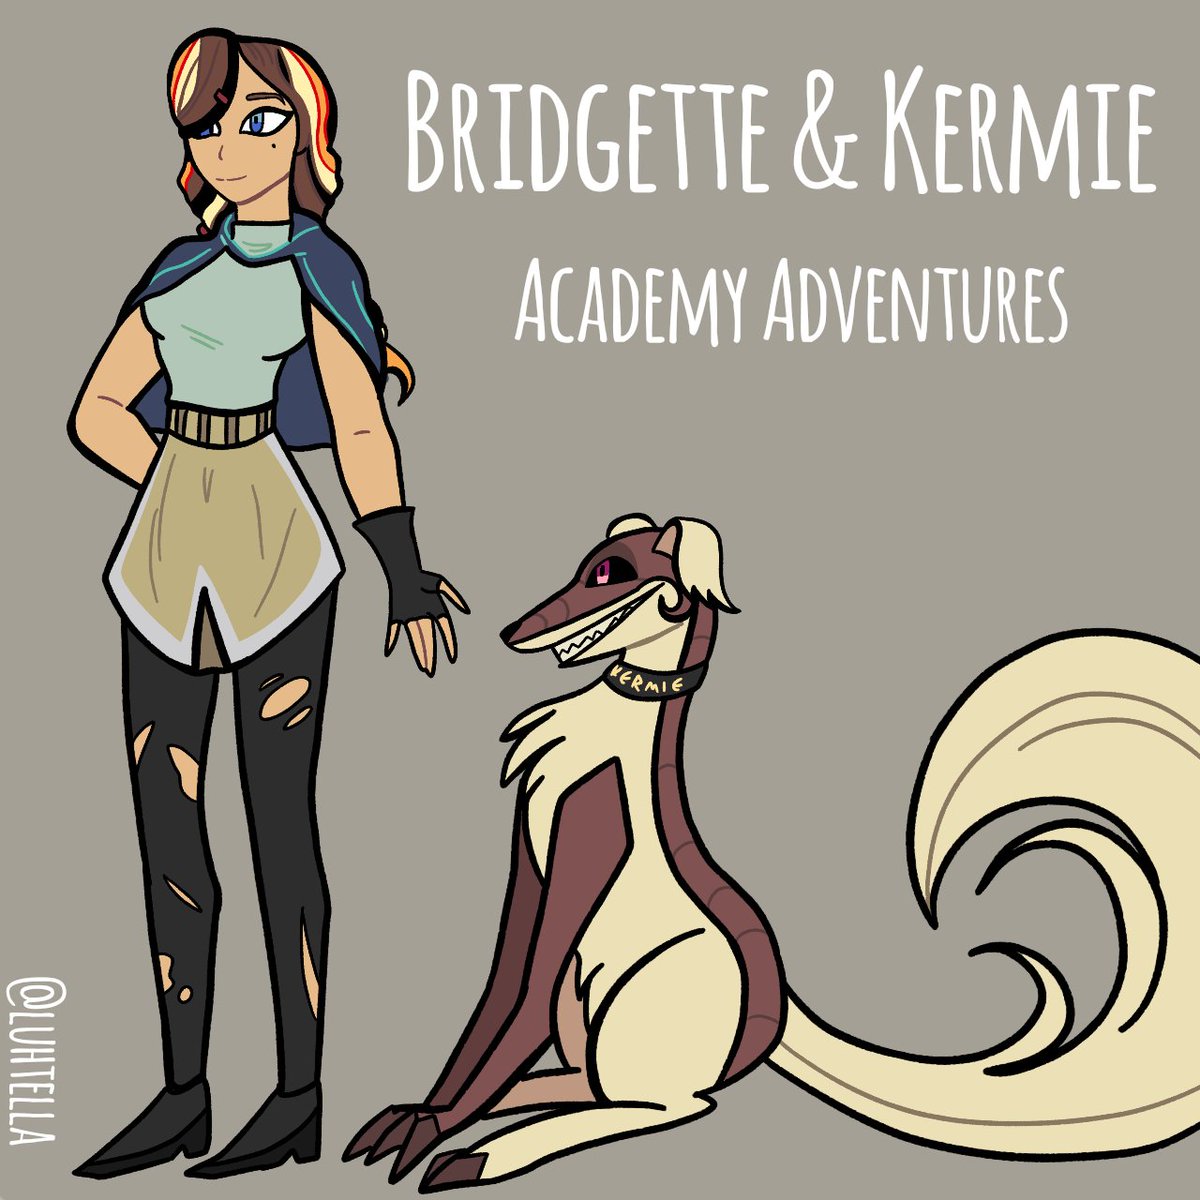 Finished Academy Adventures design of Bridgette and Kermie

Academy Adventures is owned by @/TeiahnFrost 

#LeagueOfLegendsOc  #AcademyAdventures